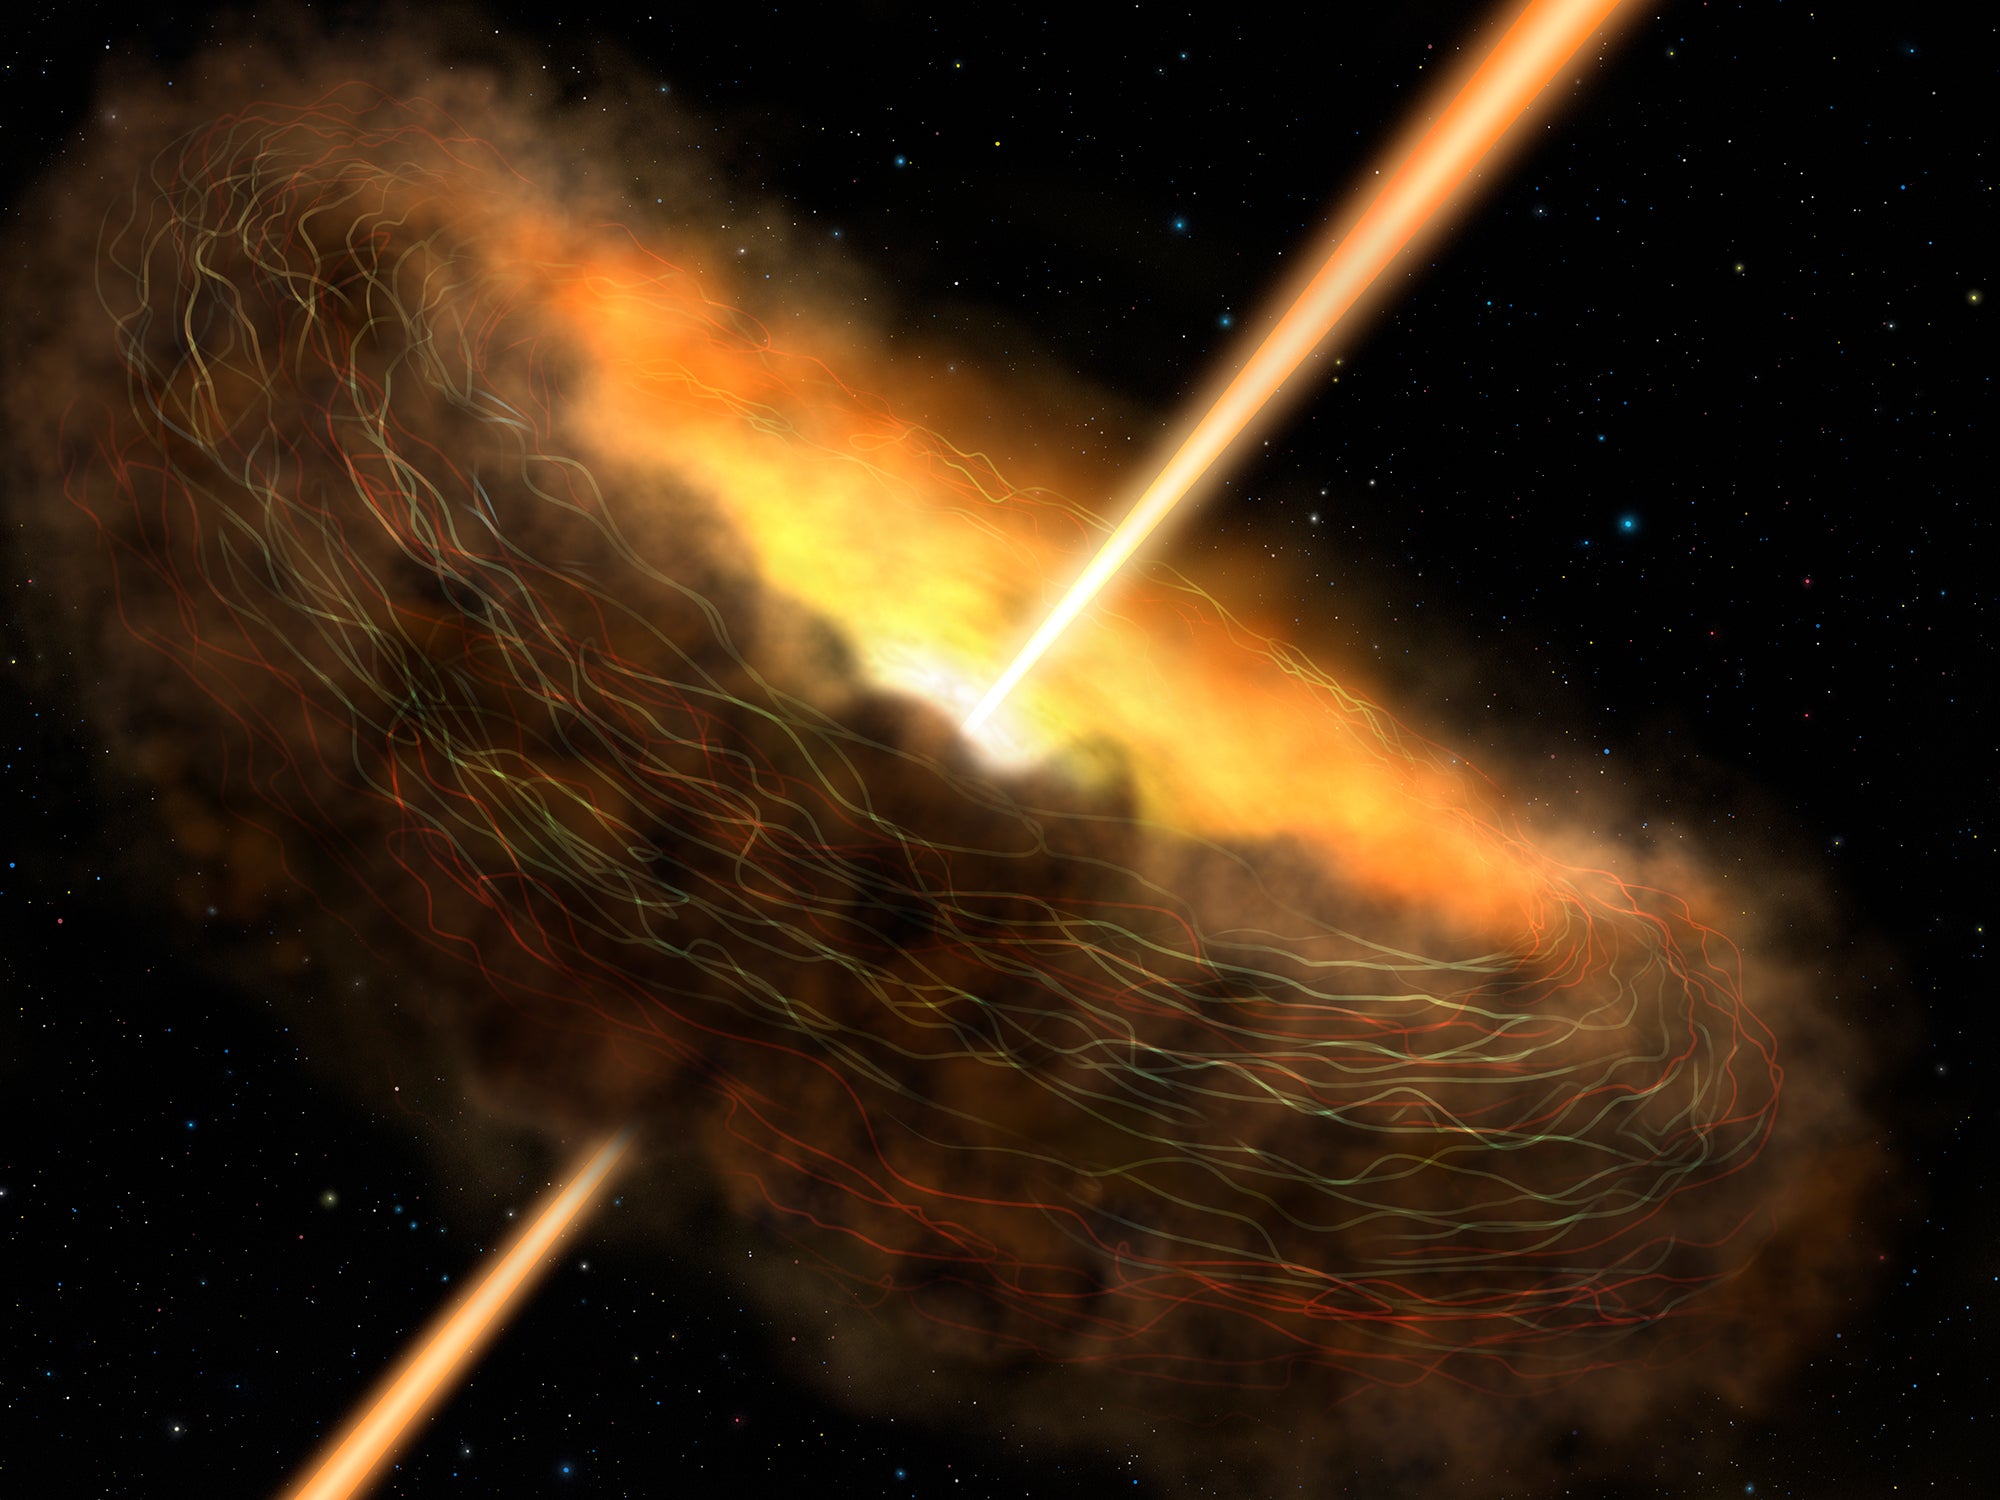 Artist's depiction of the core of a supermassive black hole, including a dusty doughnut-shaped ring (the torus) and collimated jets.  (Illustration: NASA/SOFIA/Lynette Cook)